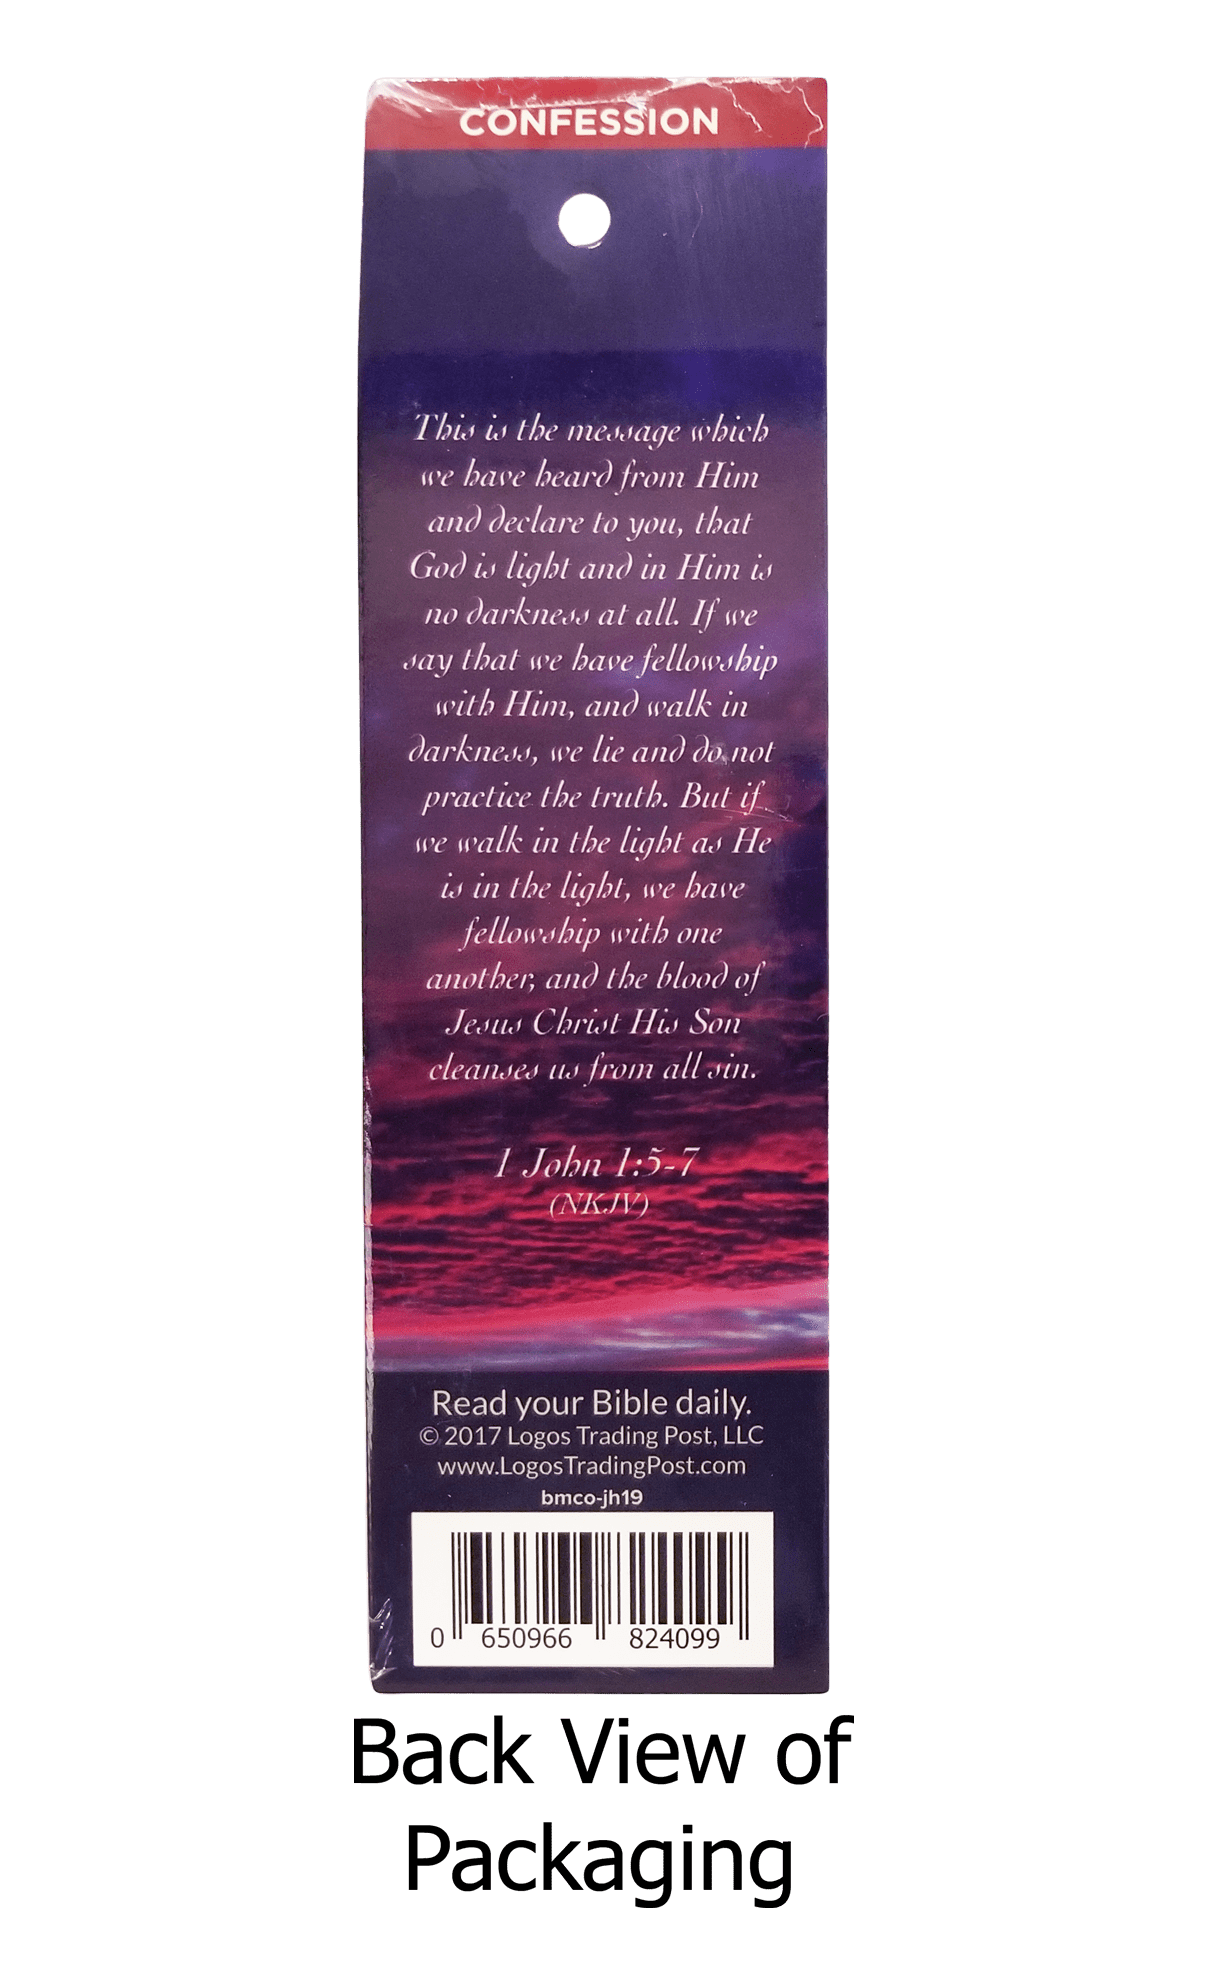 If We Confess Our Sins, He is Faithful Bookmarks, Pack of 25 - Logos Trading Post, Christian Gift